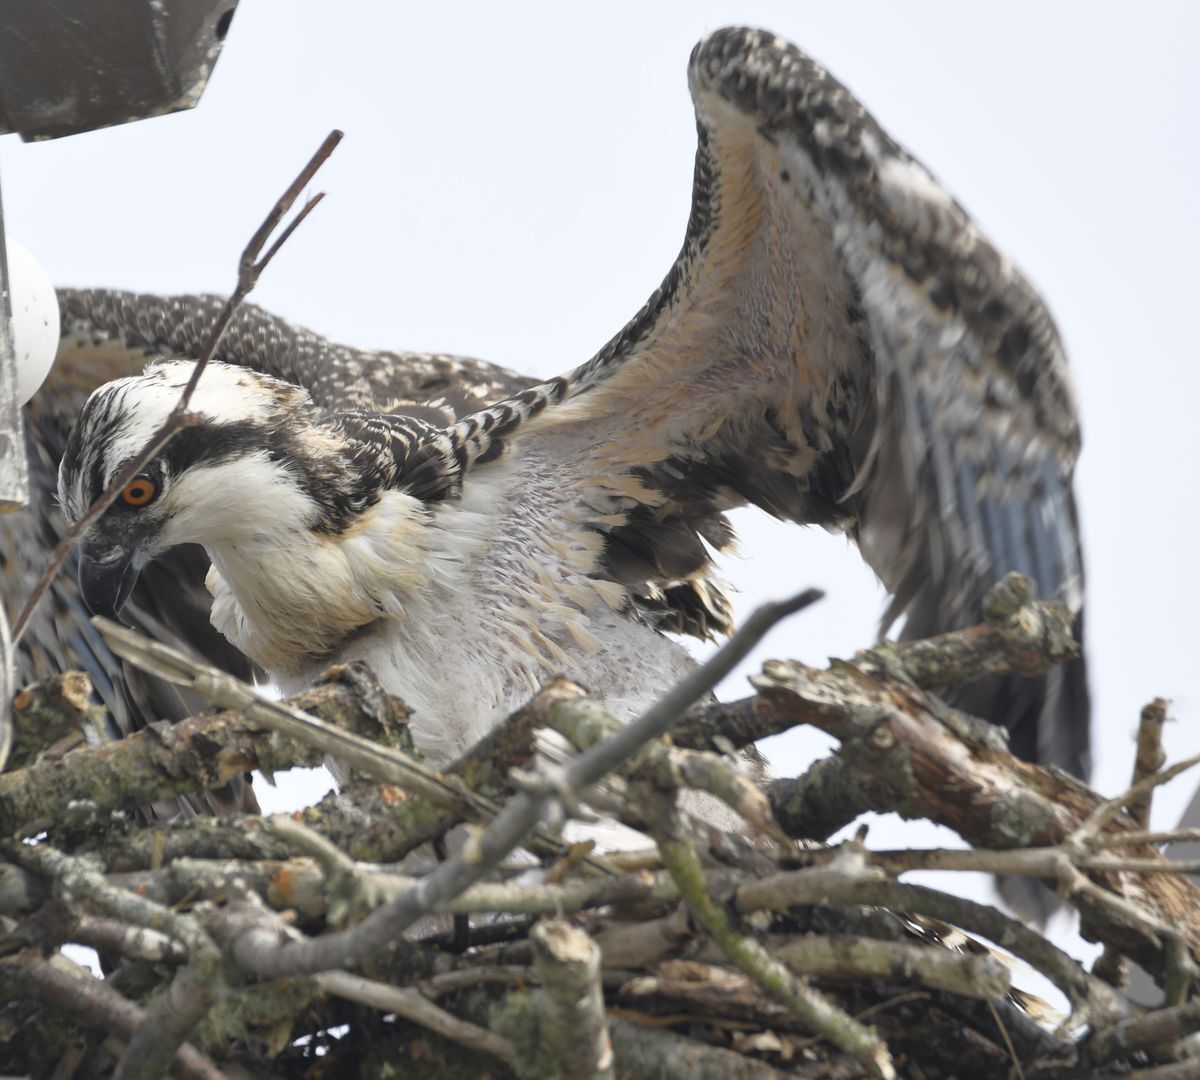 An Osprey fledgling with wings lifted up slightly in a nest against a gray sky